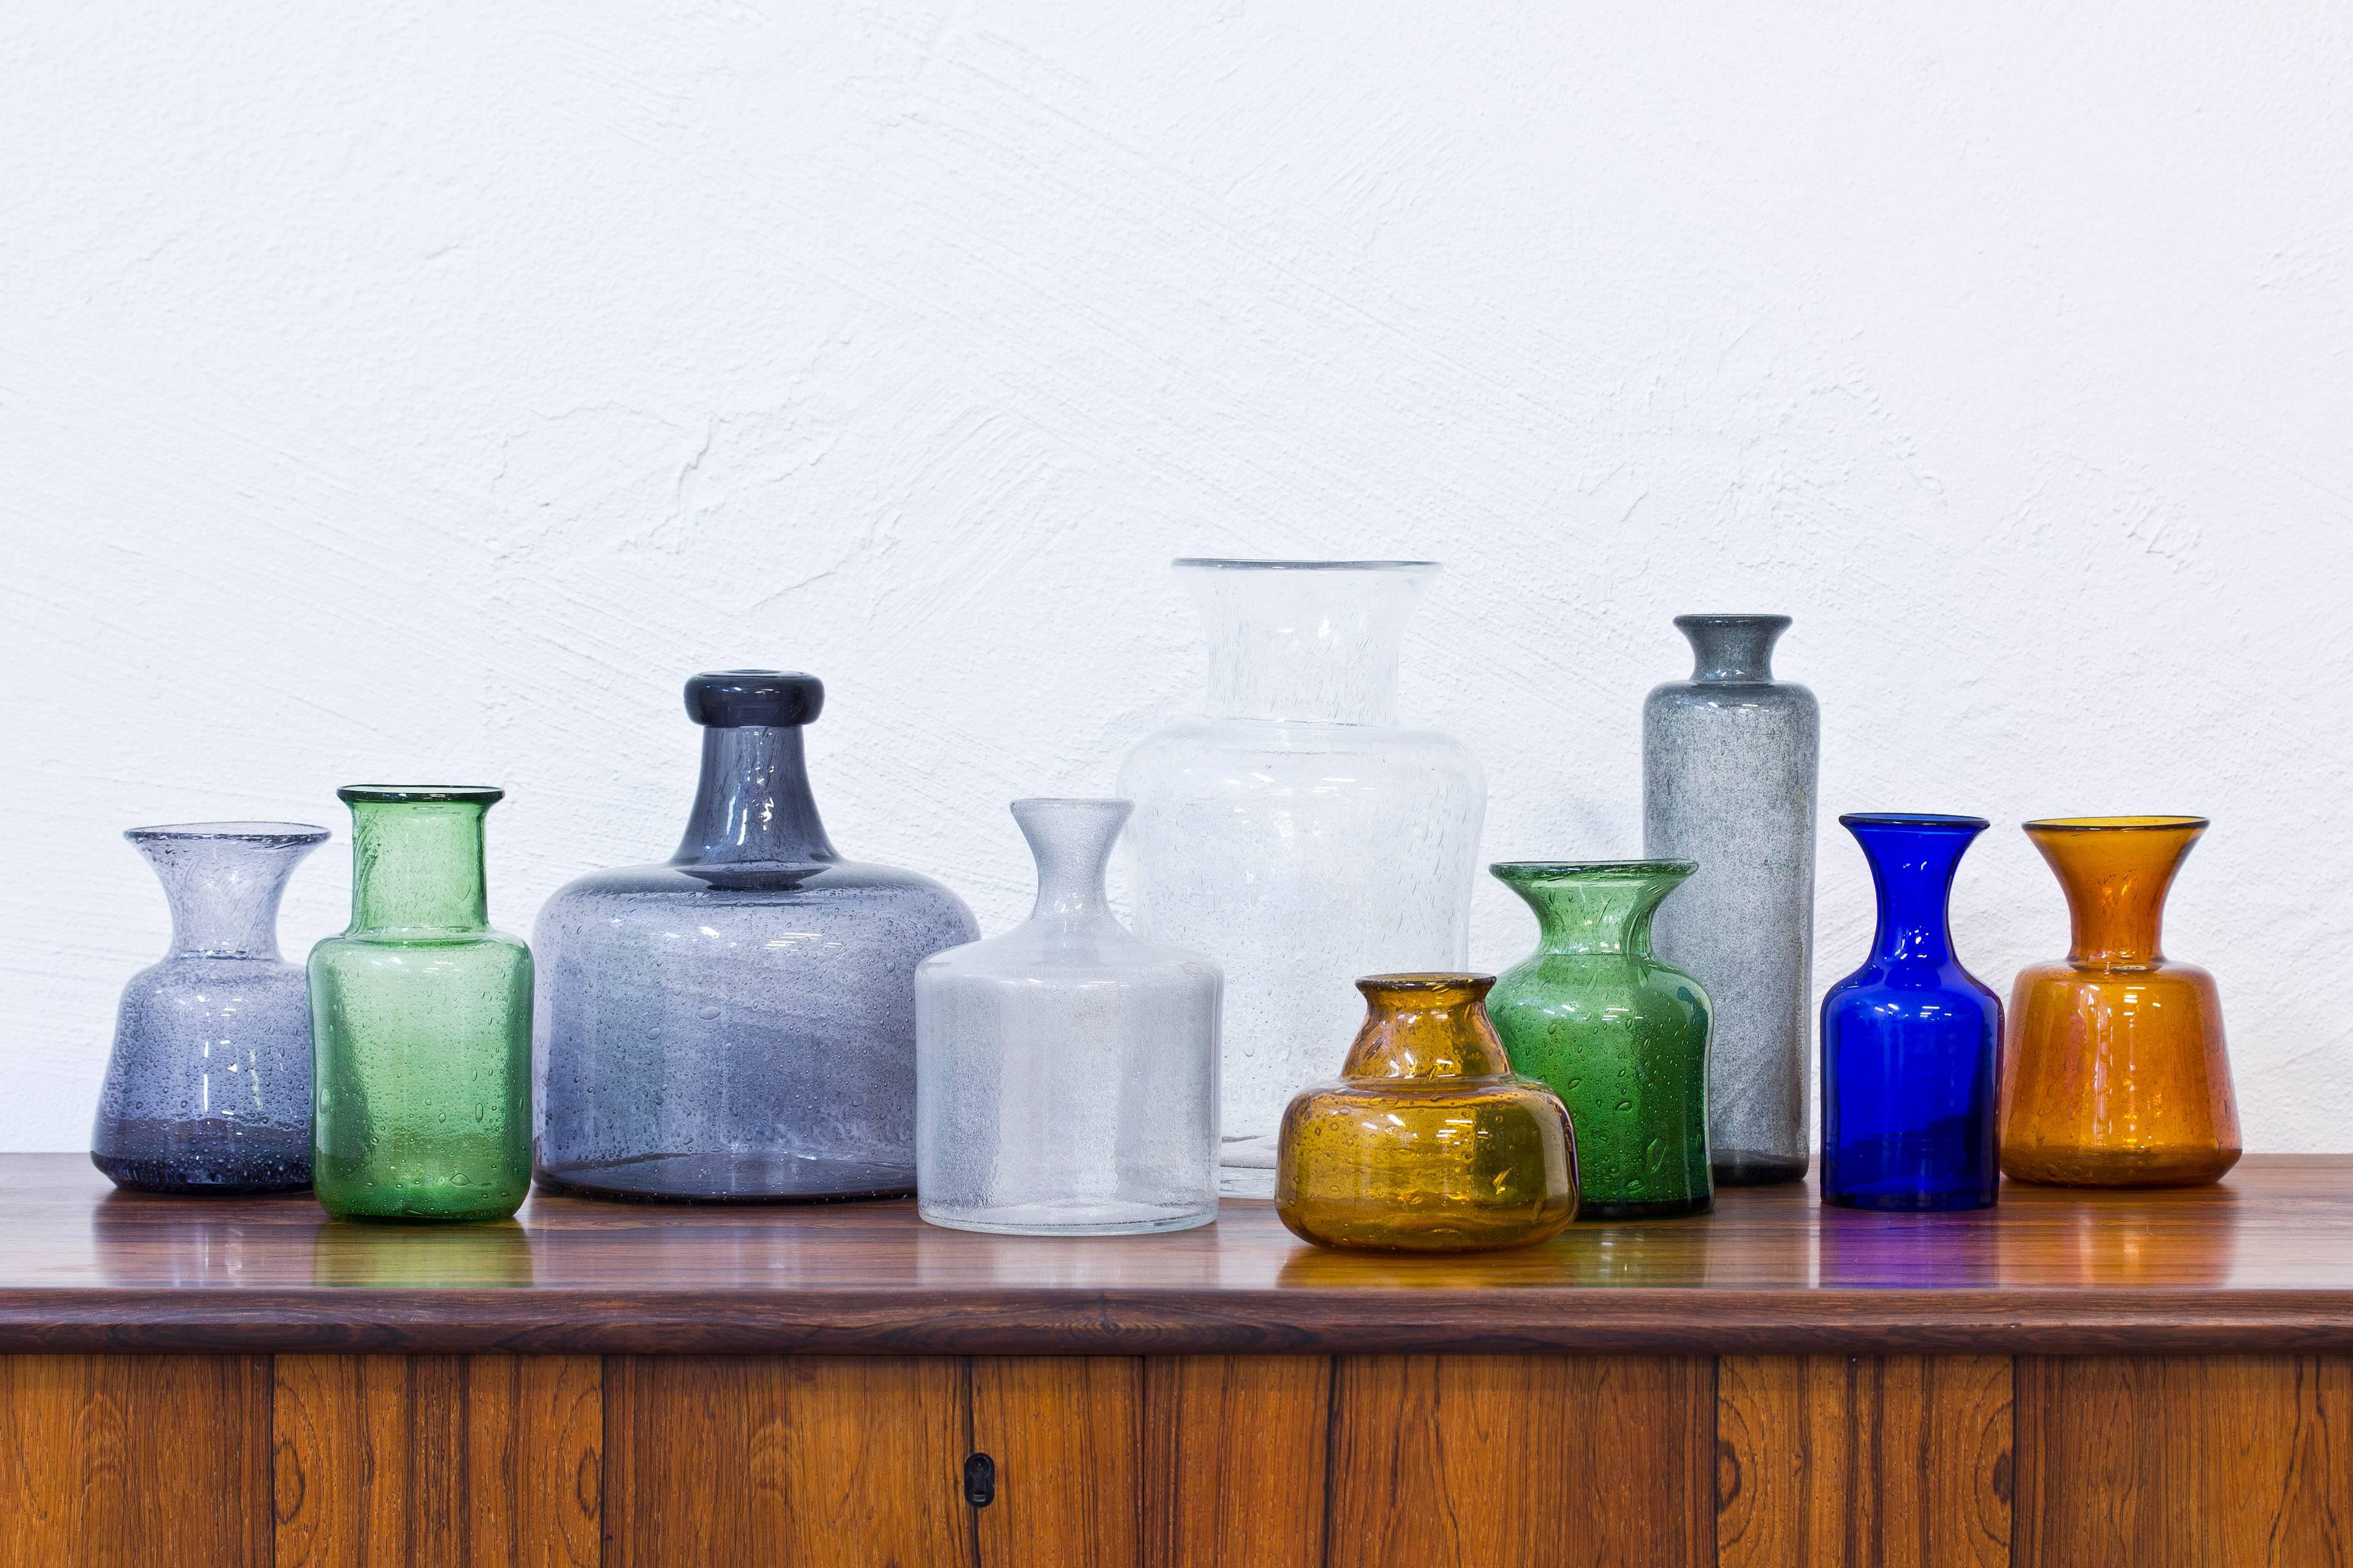 Collection of ten glass vases designed by Erik Hoglund. handblown at Boda glass hut during the 1950s. Ten different sizes, colors and shapes in very good to excellent condition. 

Price for the collection.